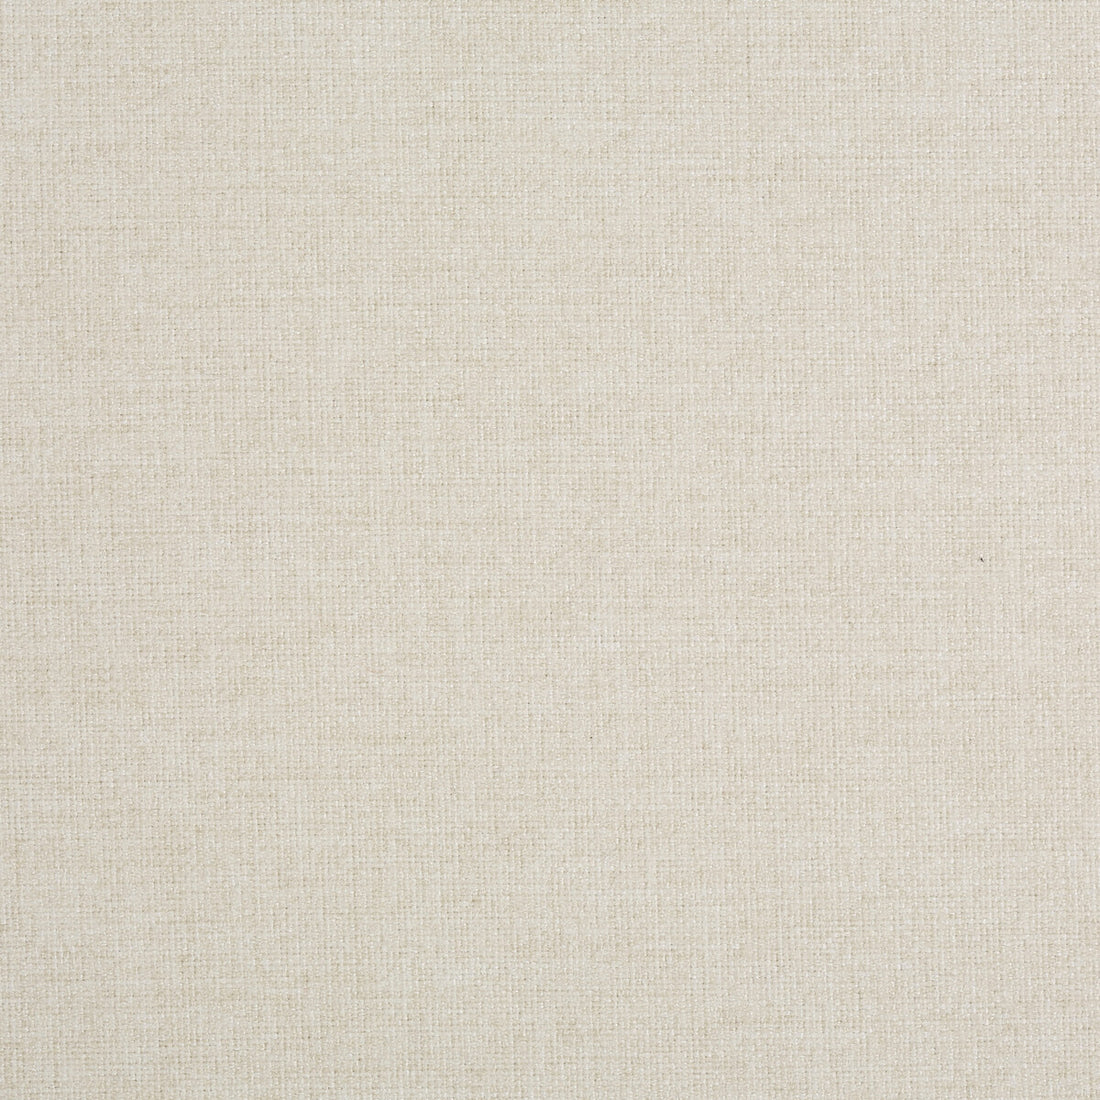 Kravet Contract fabric in 35122-1 color - pattern 35122.1.0 - by Kravet Contract in the Crypton Incase collection